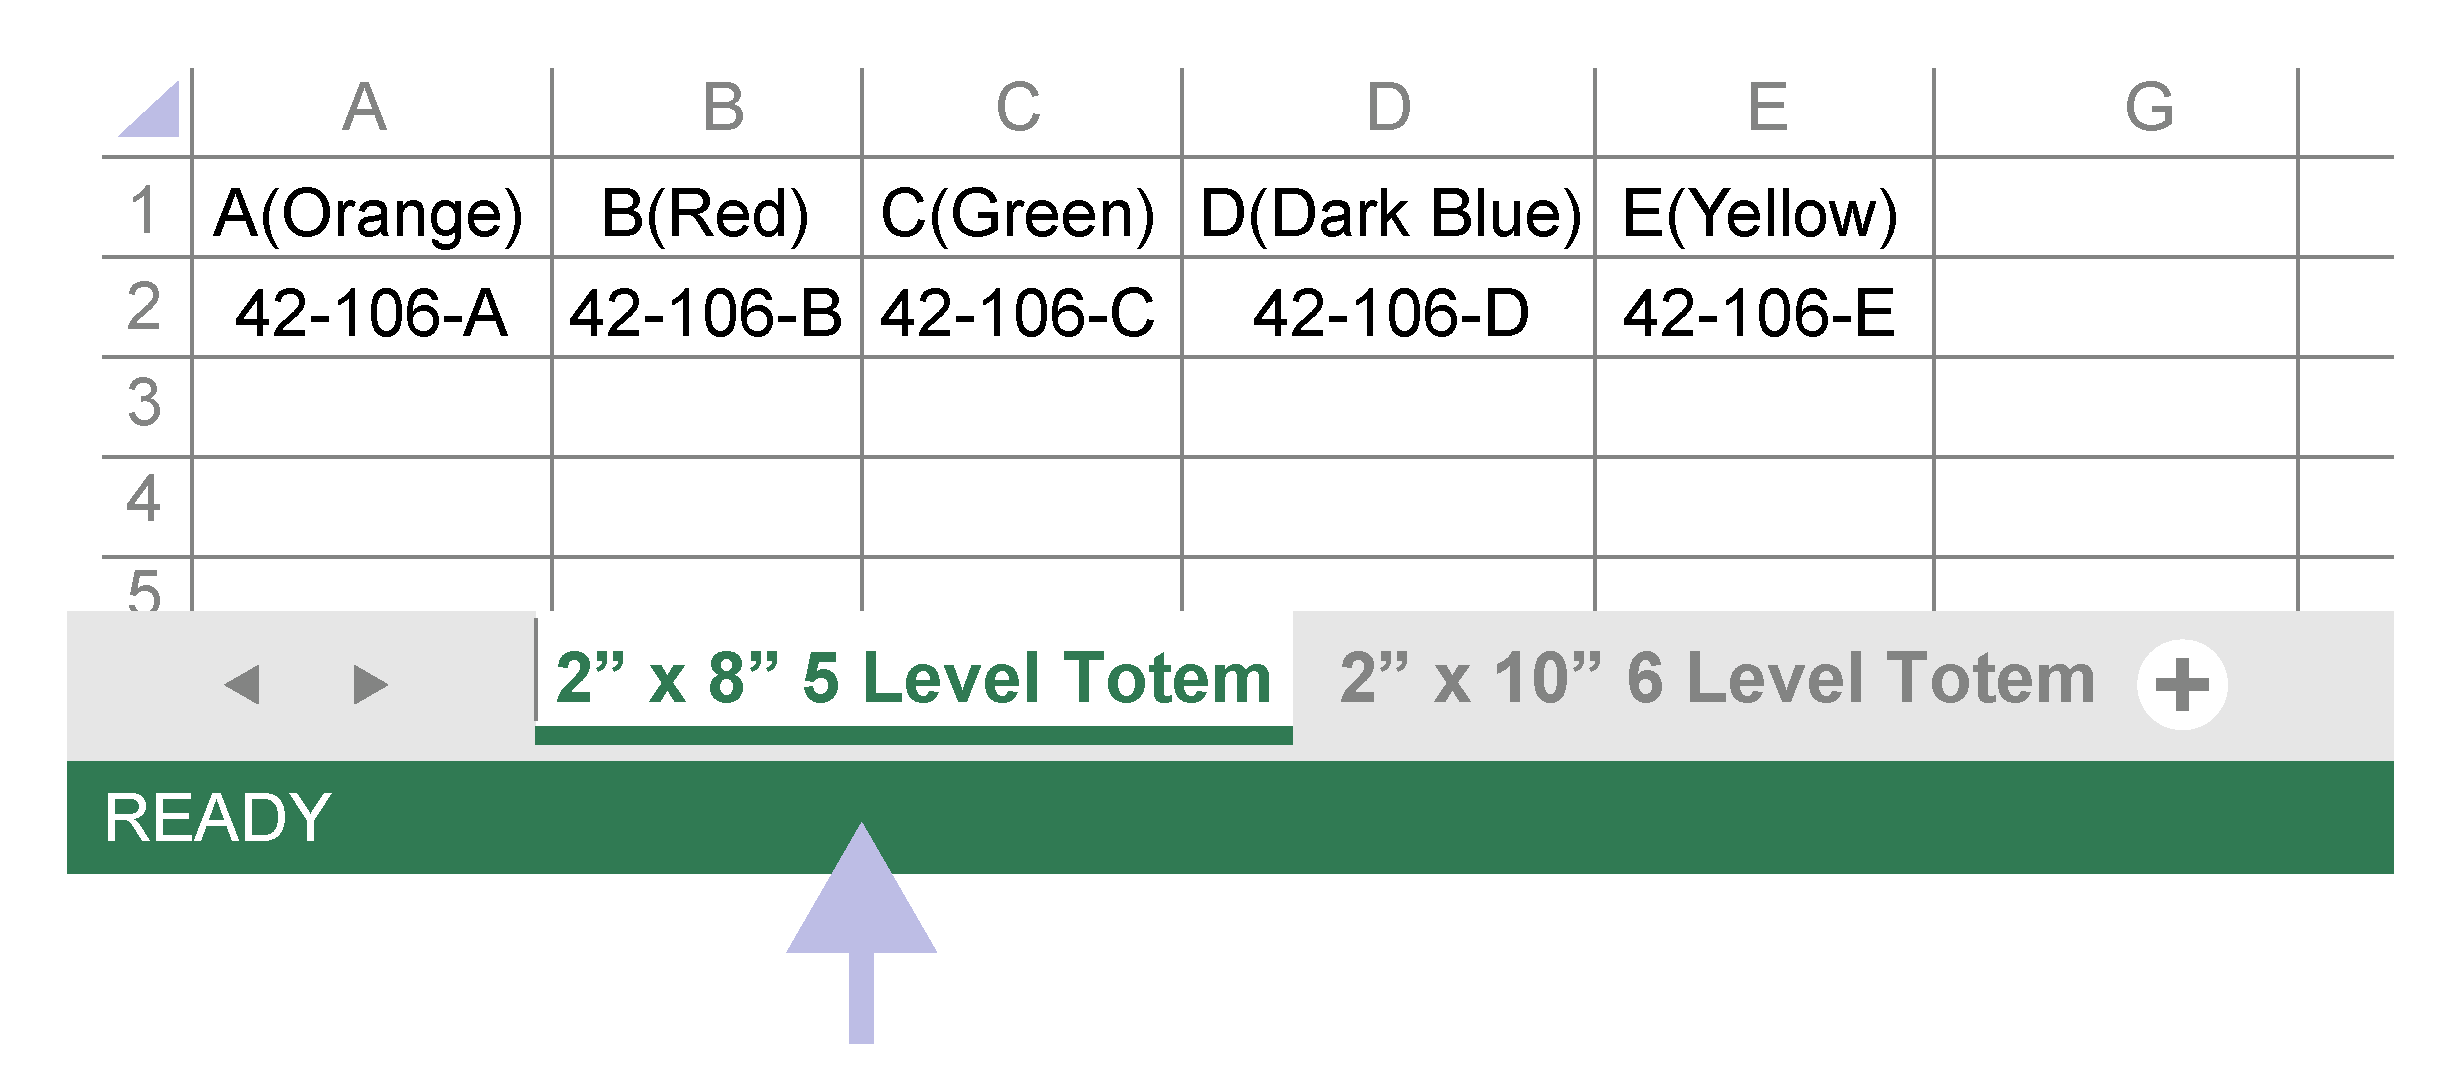 5 level totem label on tab 1 in excel